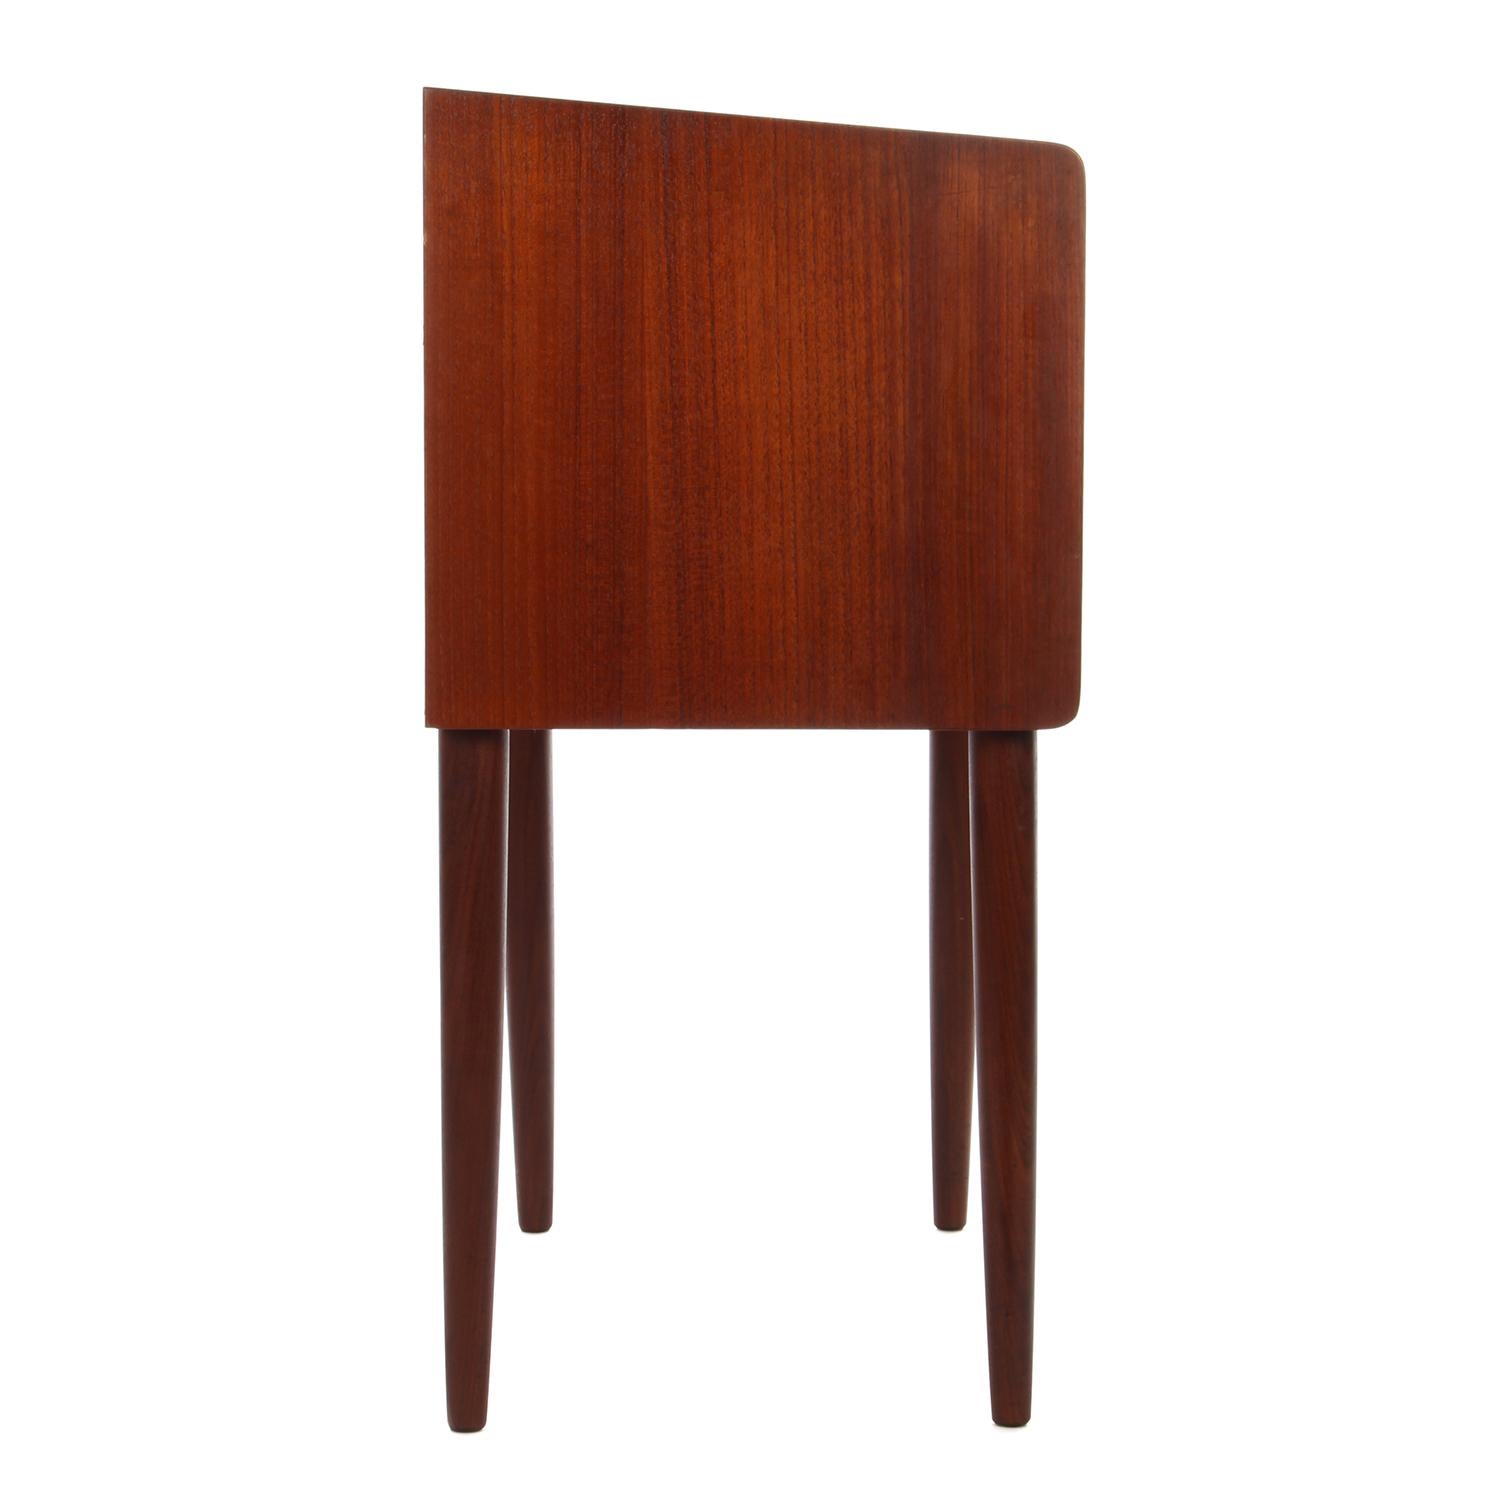 Mid-20th Century Rosewood Dresser, 1960s Danish Midcentury Chest with Drawers or Entry Table